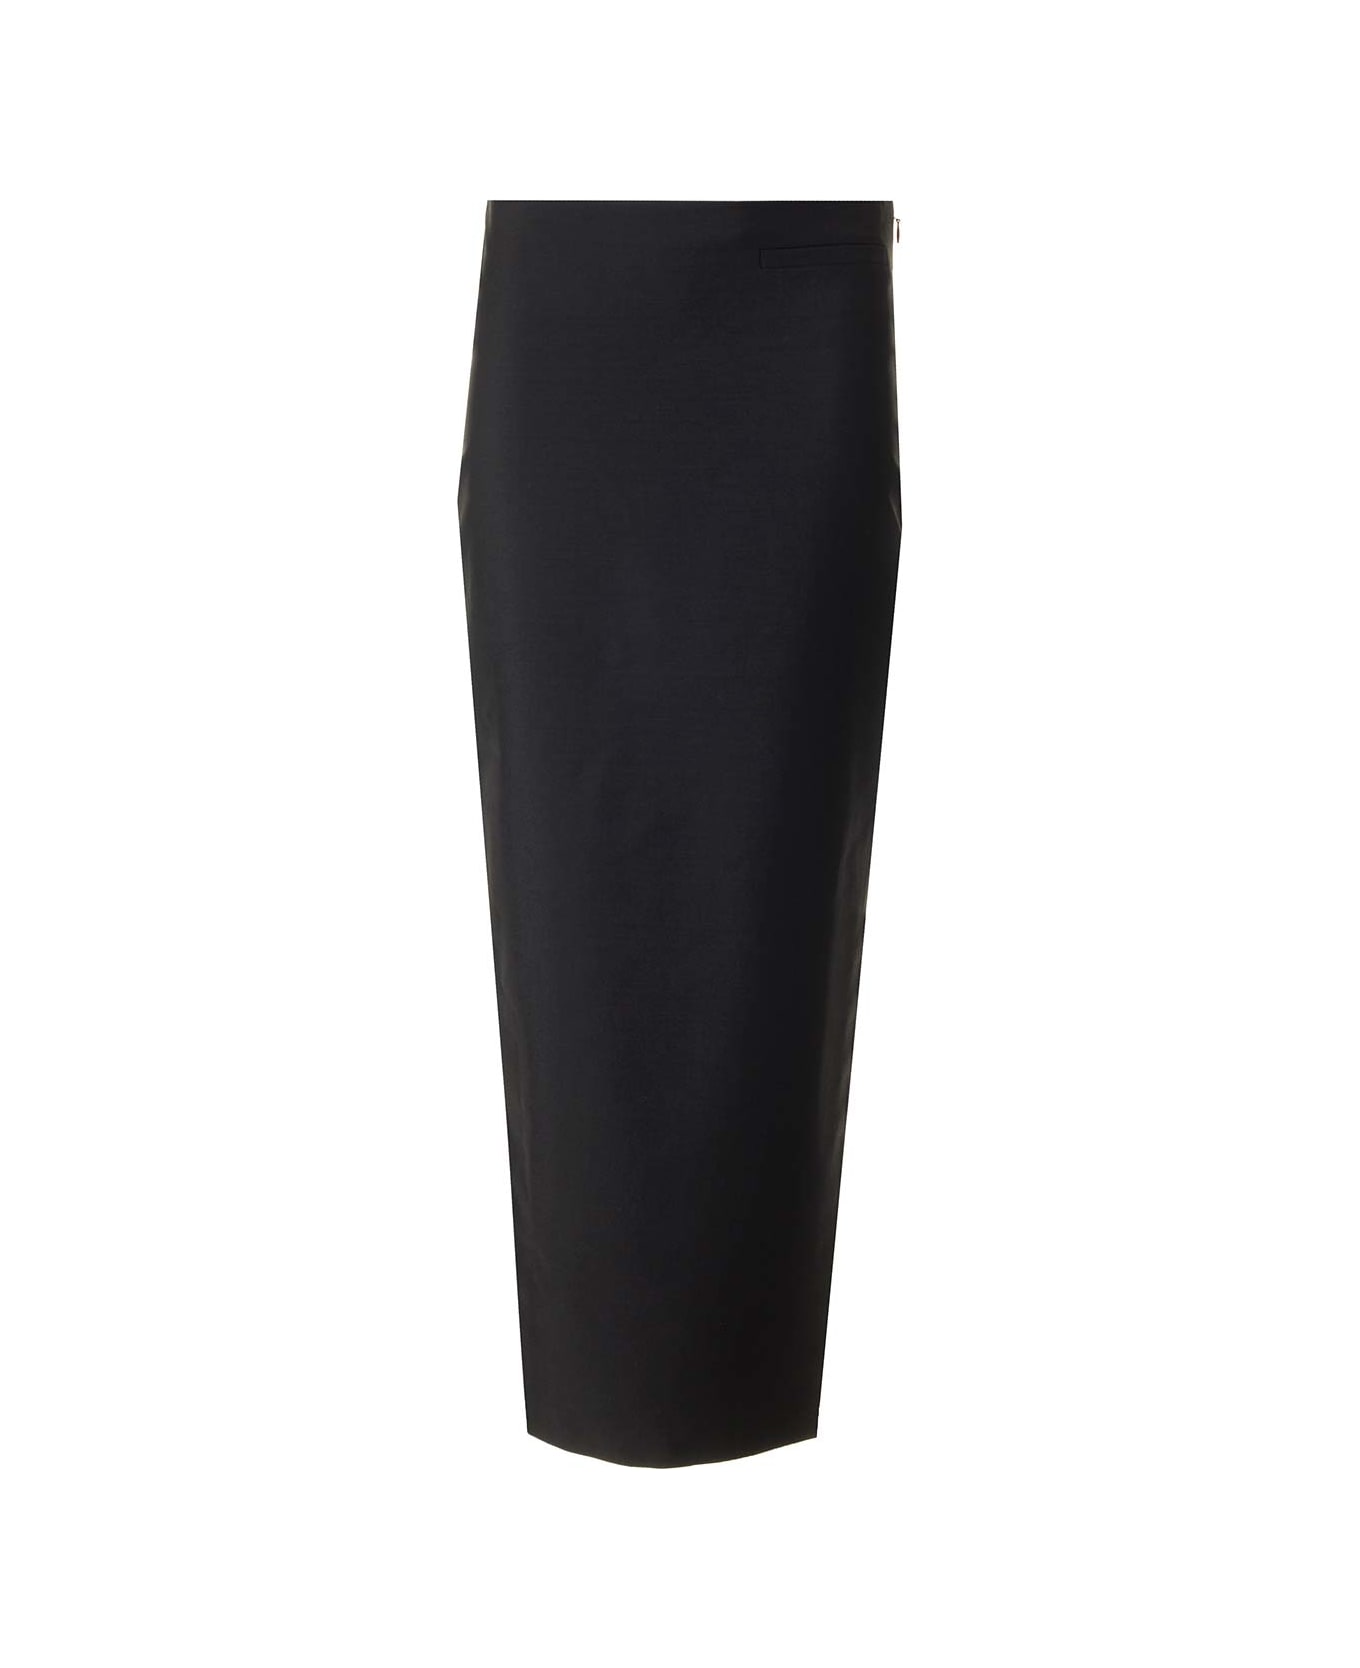 Givenchy Wool And Mohair Asymmetric Skirt - Black